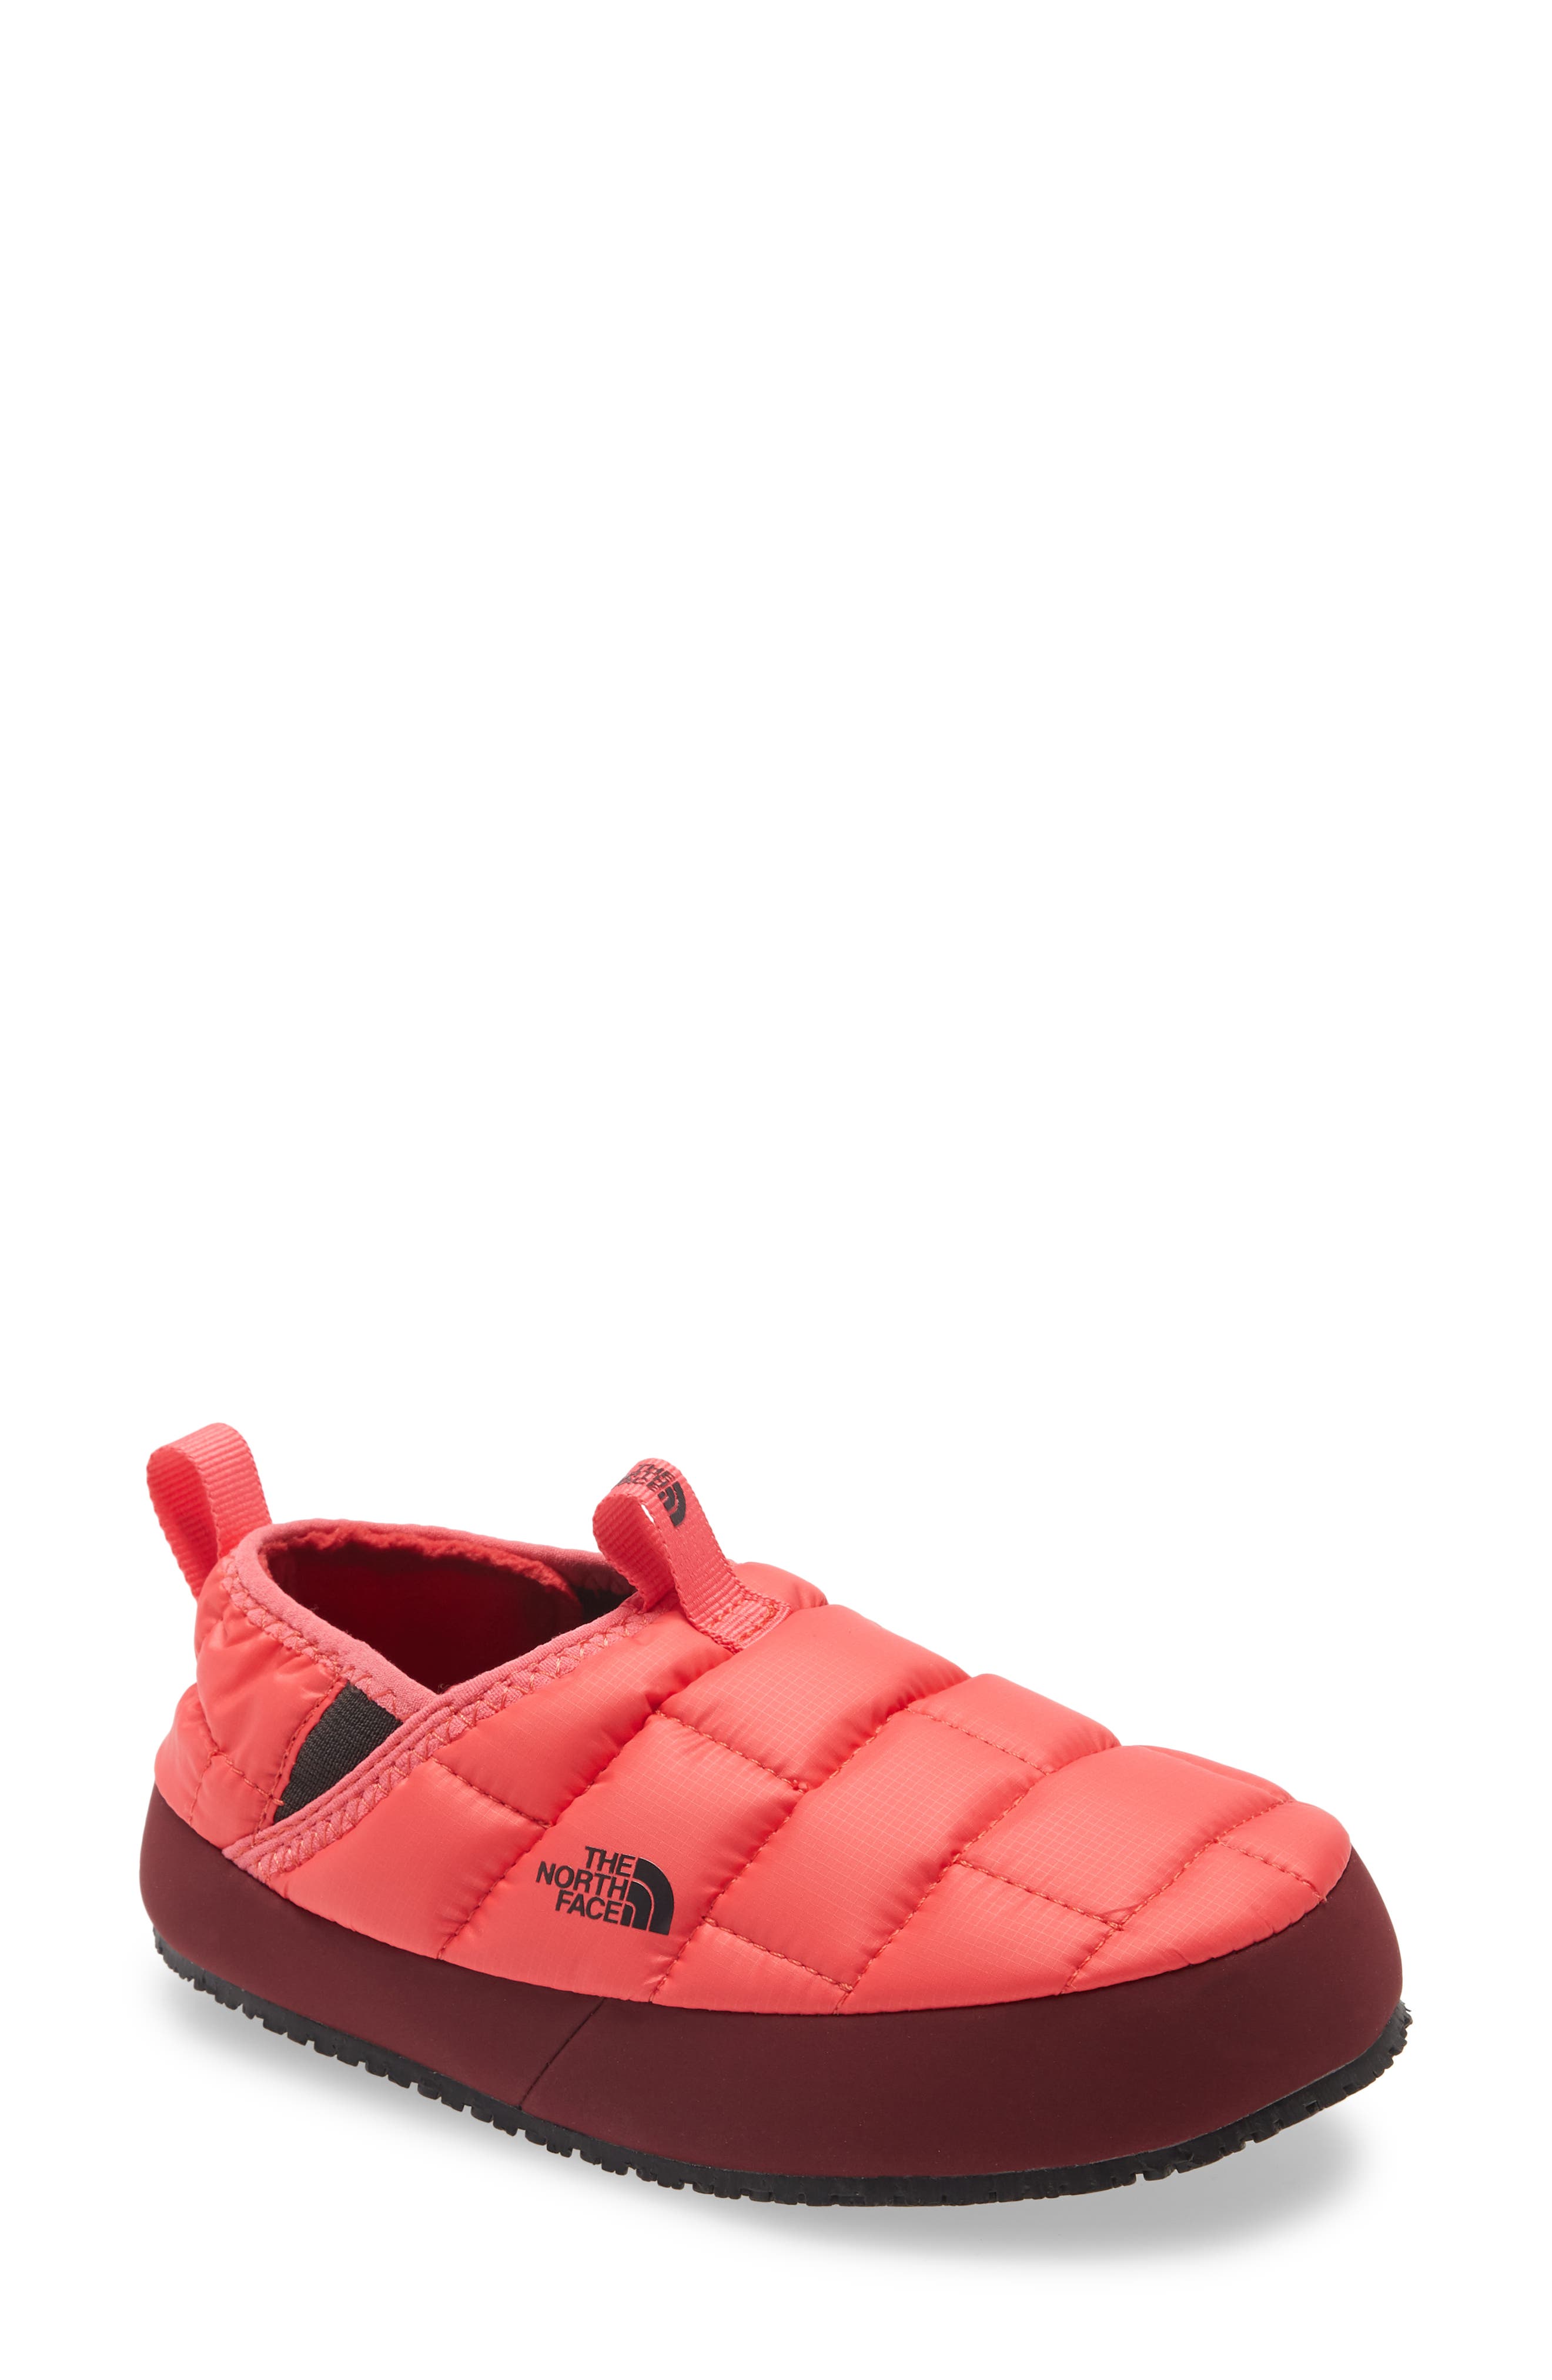 Boys' Pink Slippers | Nordstrom